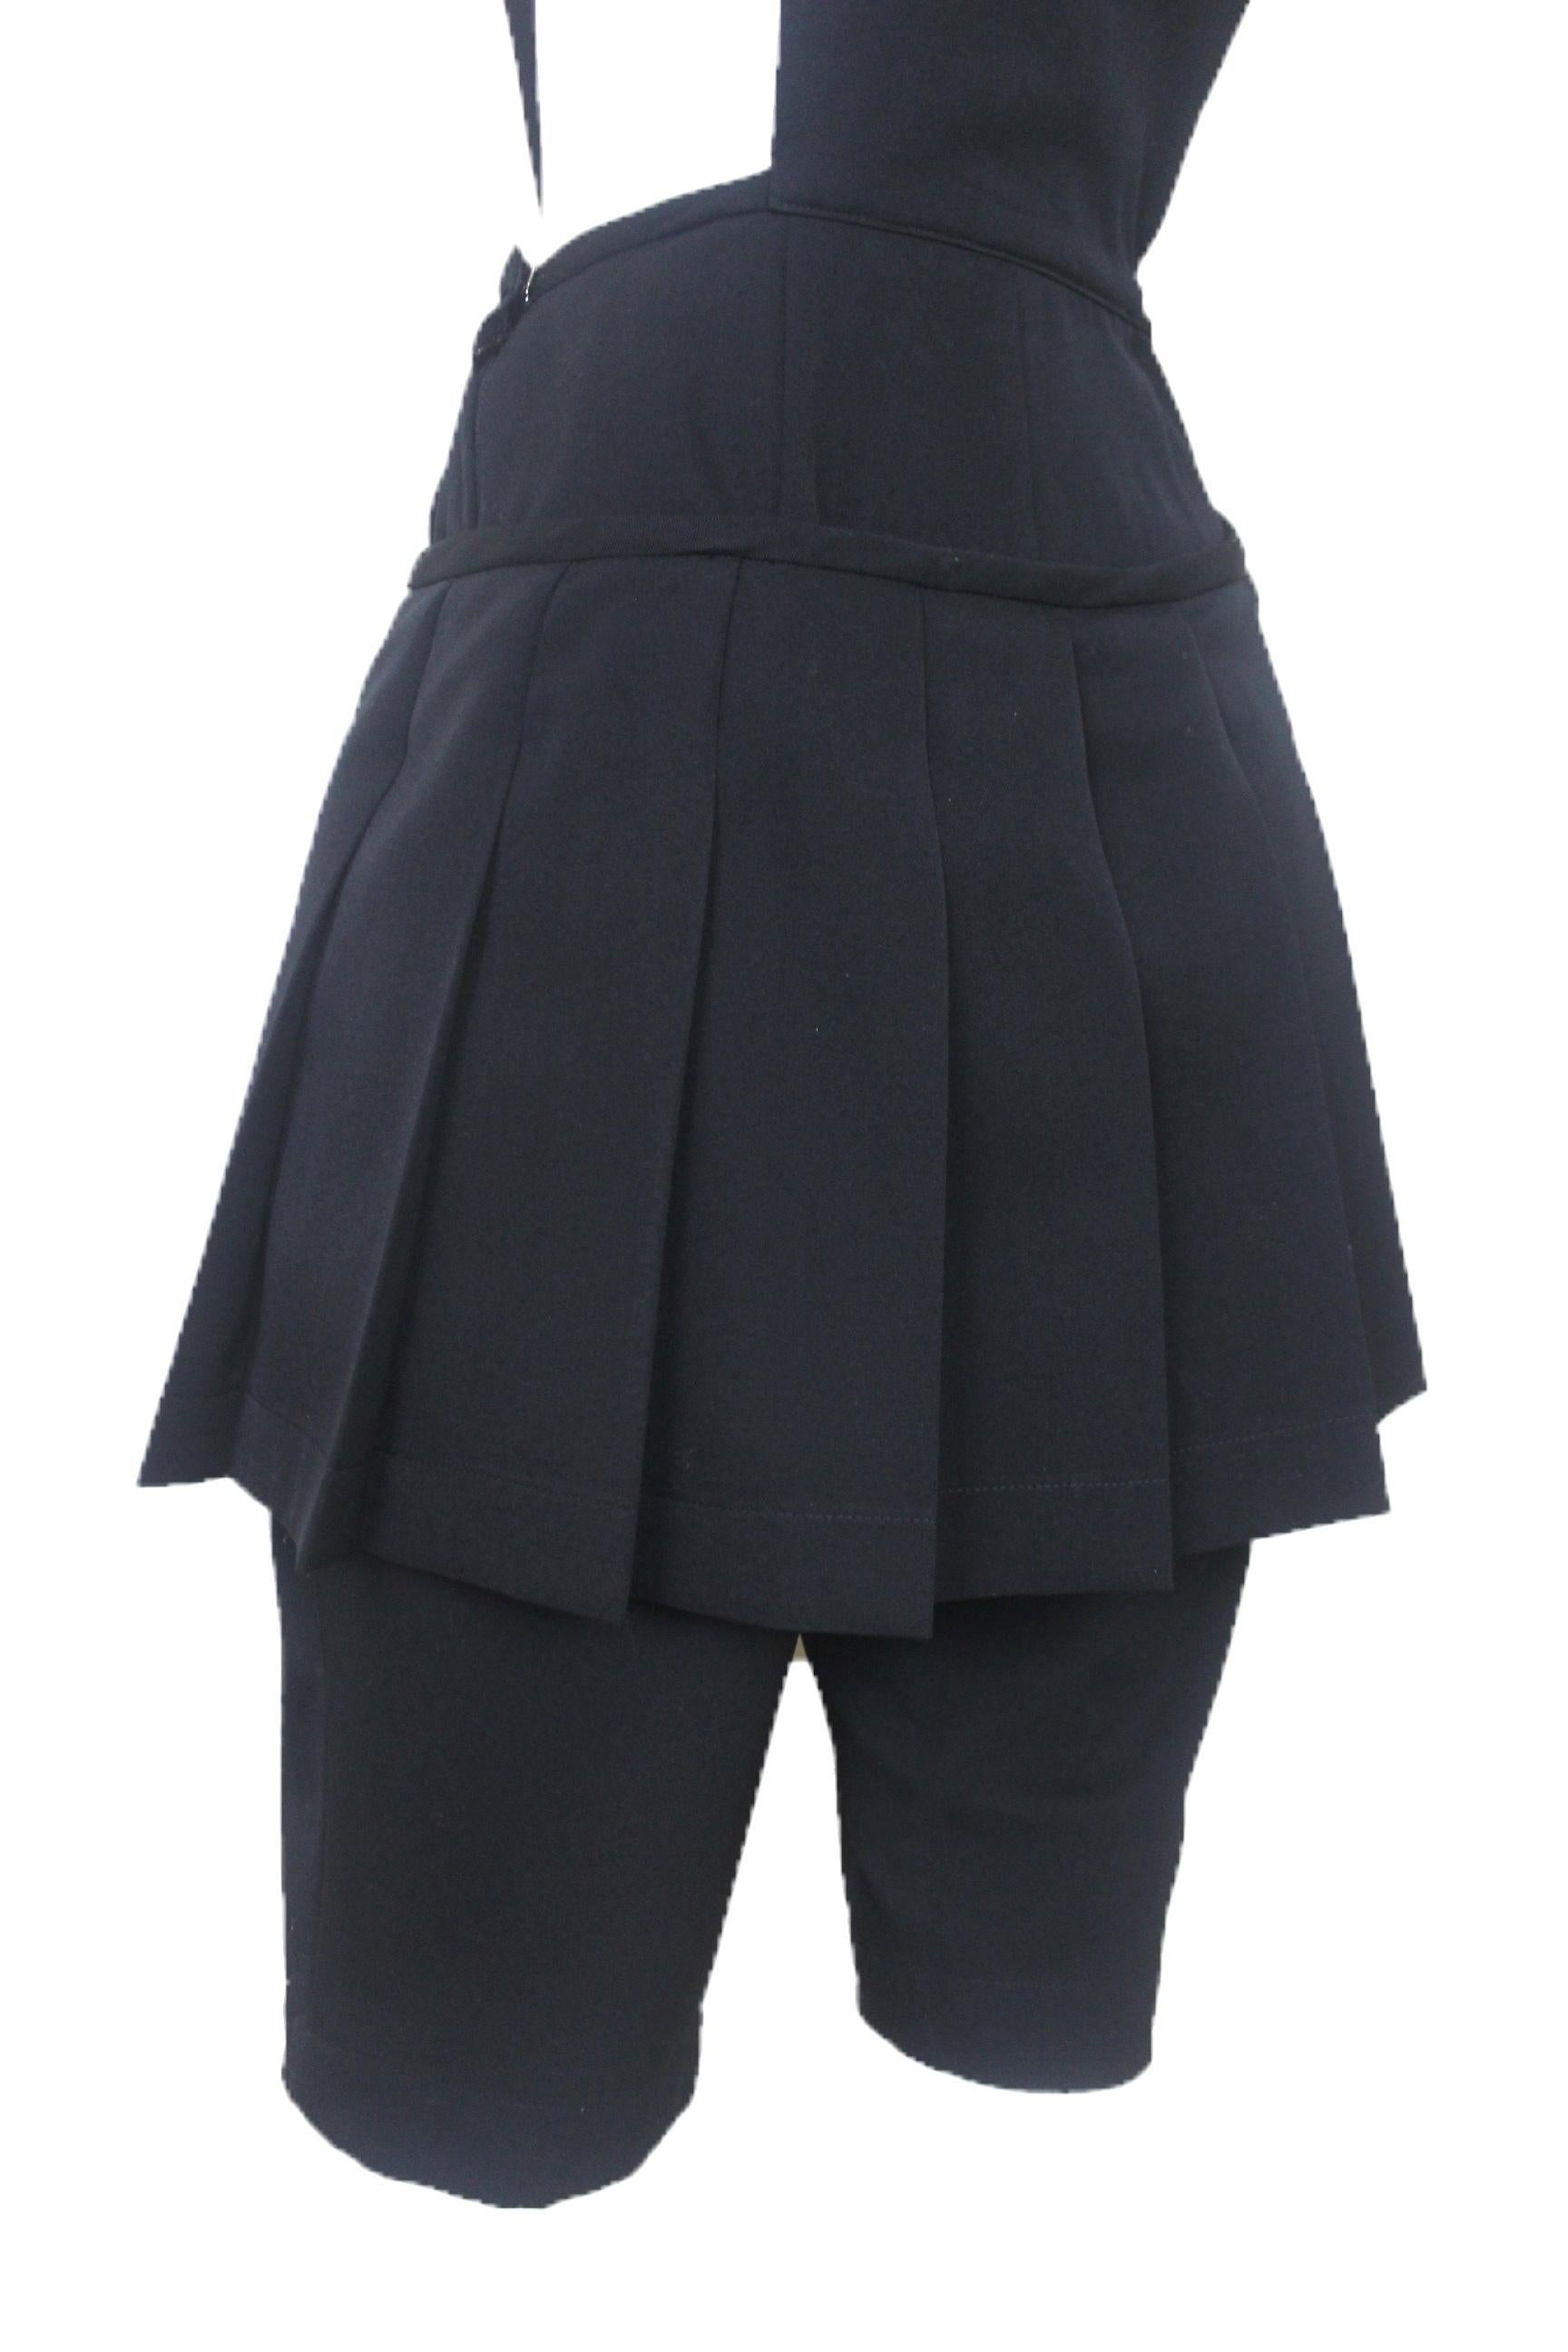 Comme des Garcons 1989 Collection Reverse Dungarees with attached Skirt For Sale 10